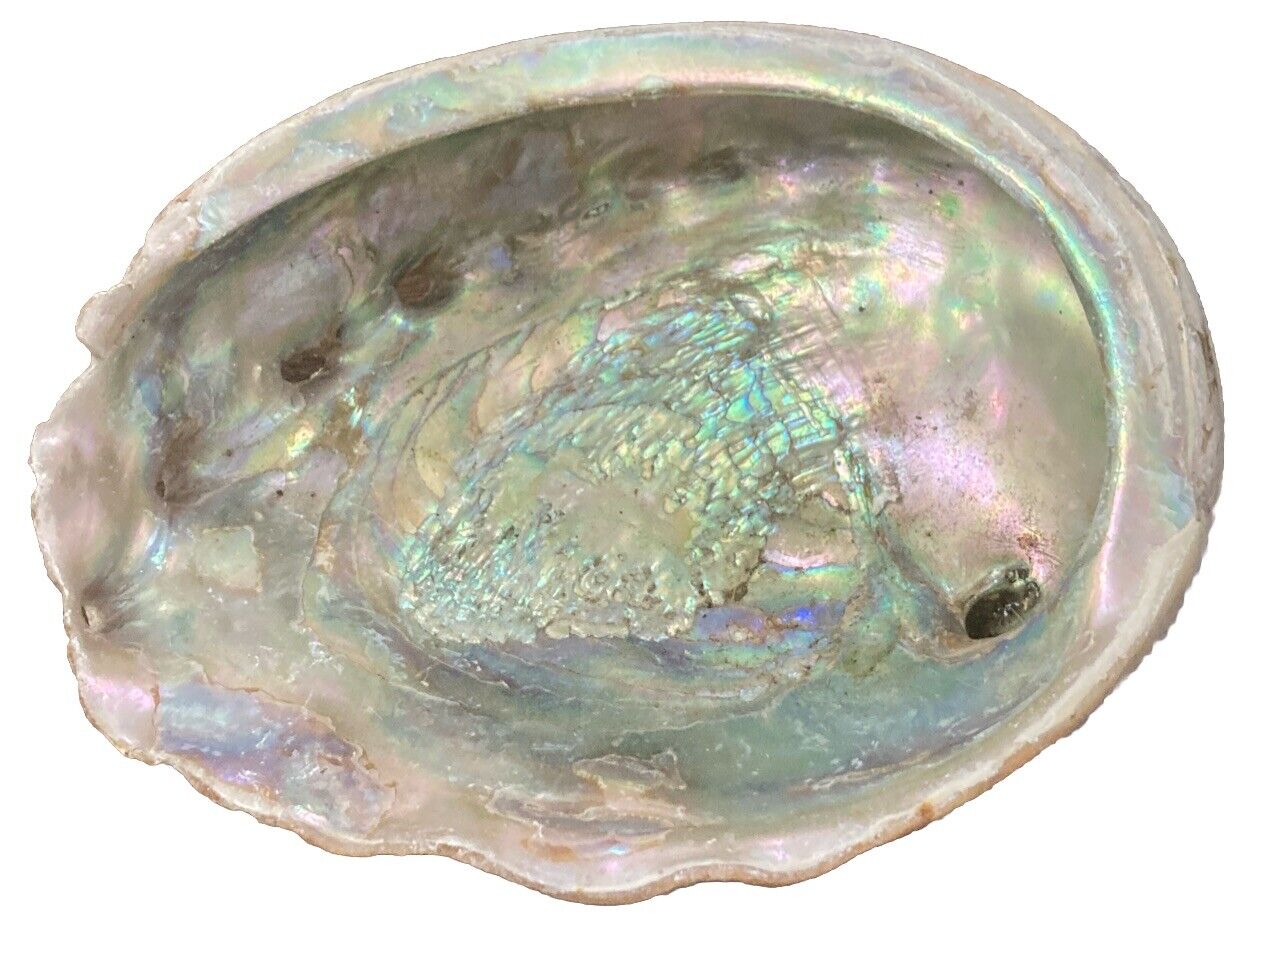 Large Vintage RED Abalone Shell for Crafts Jewlery Art Decor 7” X 5.75” # 8